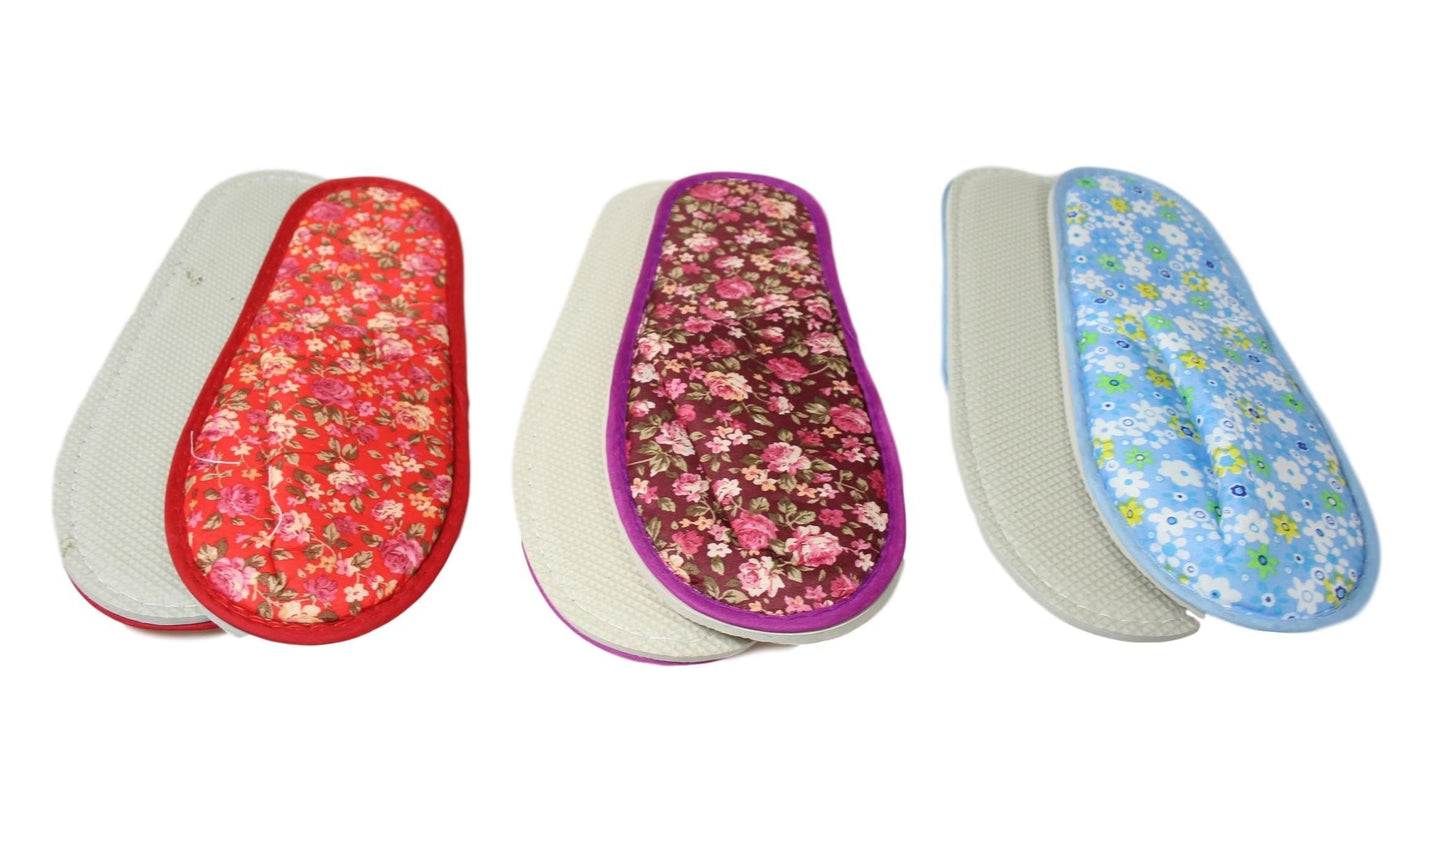 Bathroom Slippers Floral Design One Size 27 cm Assorted Colours 2279 (Large Letter Rate)